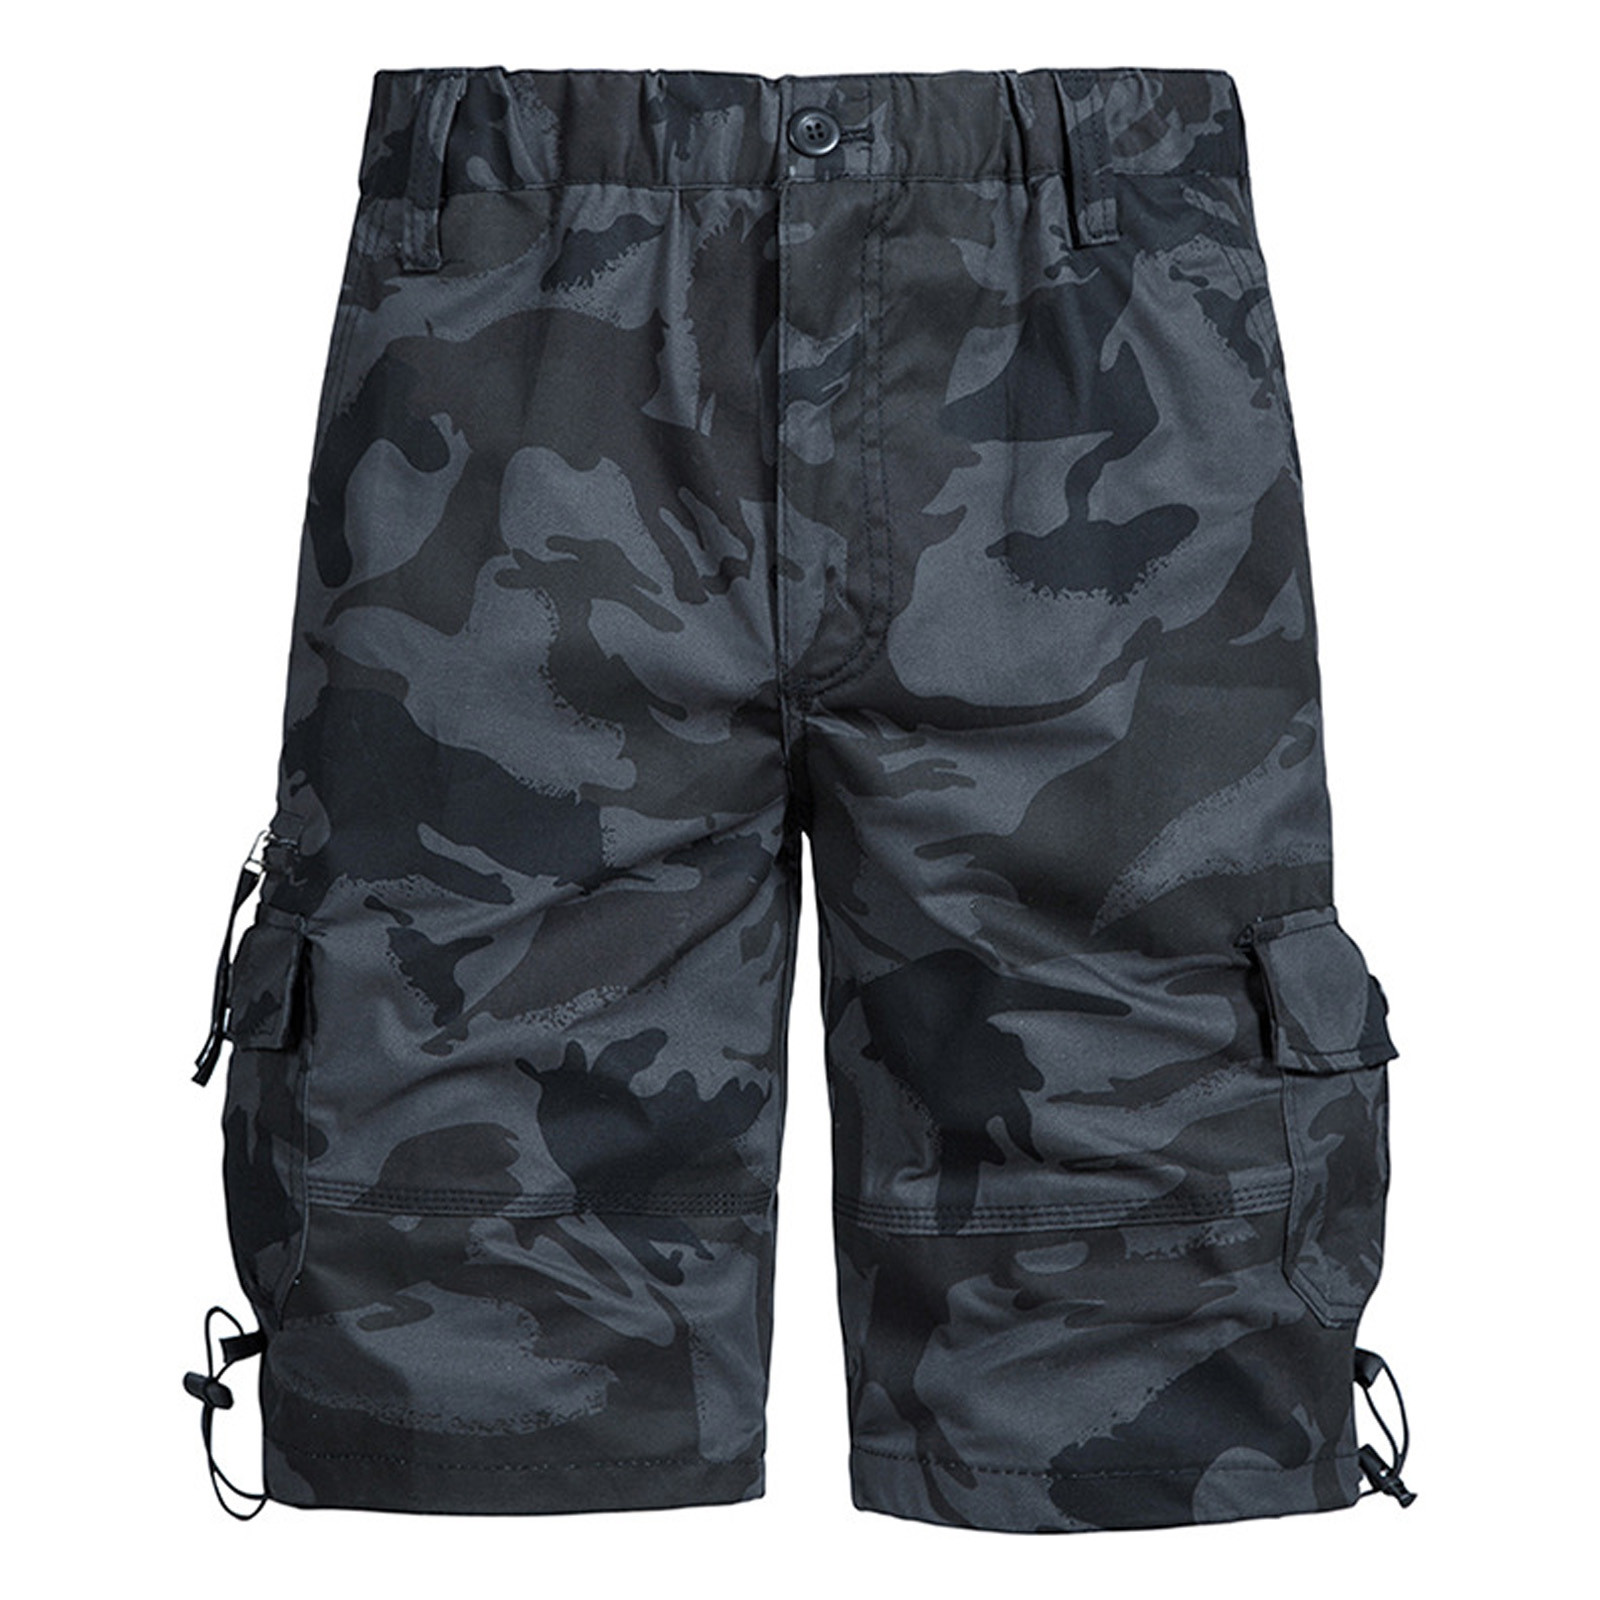 APEXFWDT Cargo Shorts for Men Big and Tall Camo Outdoor Military ...